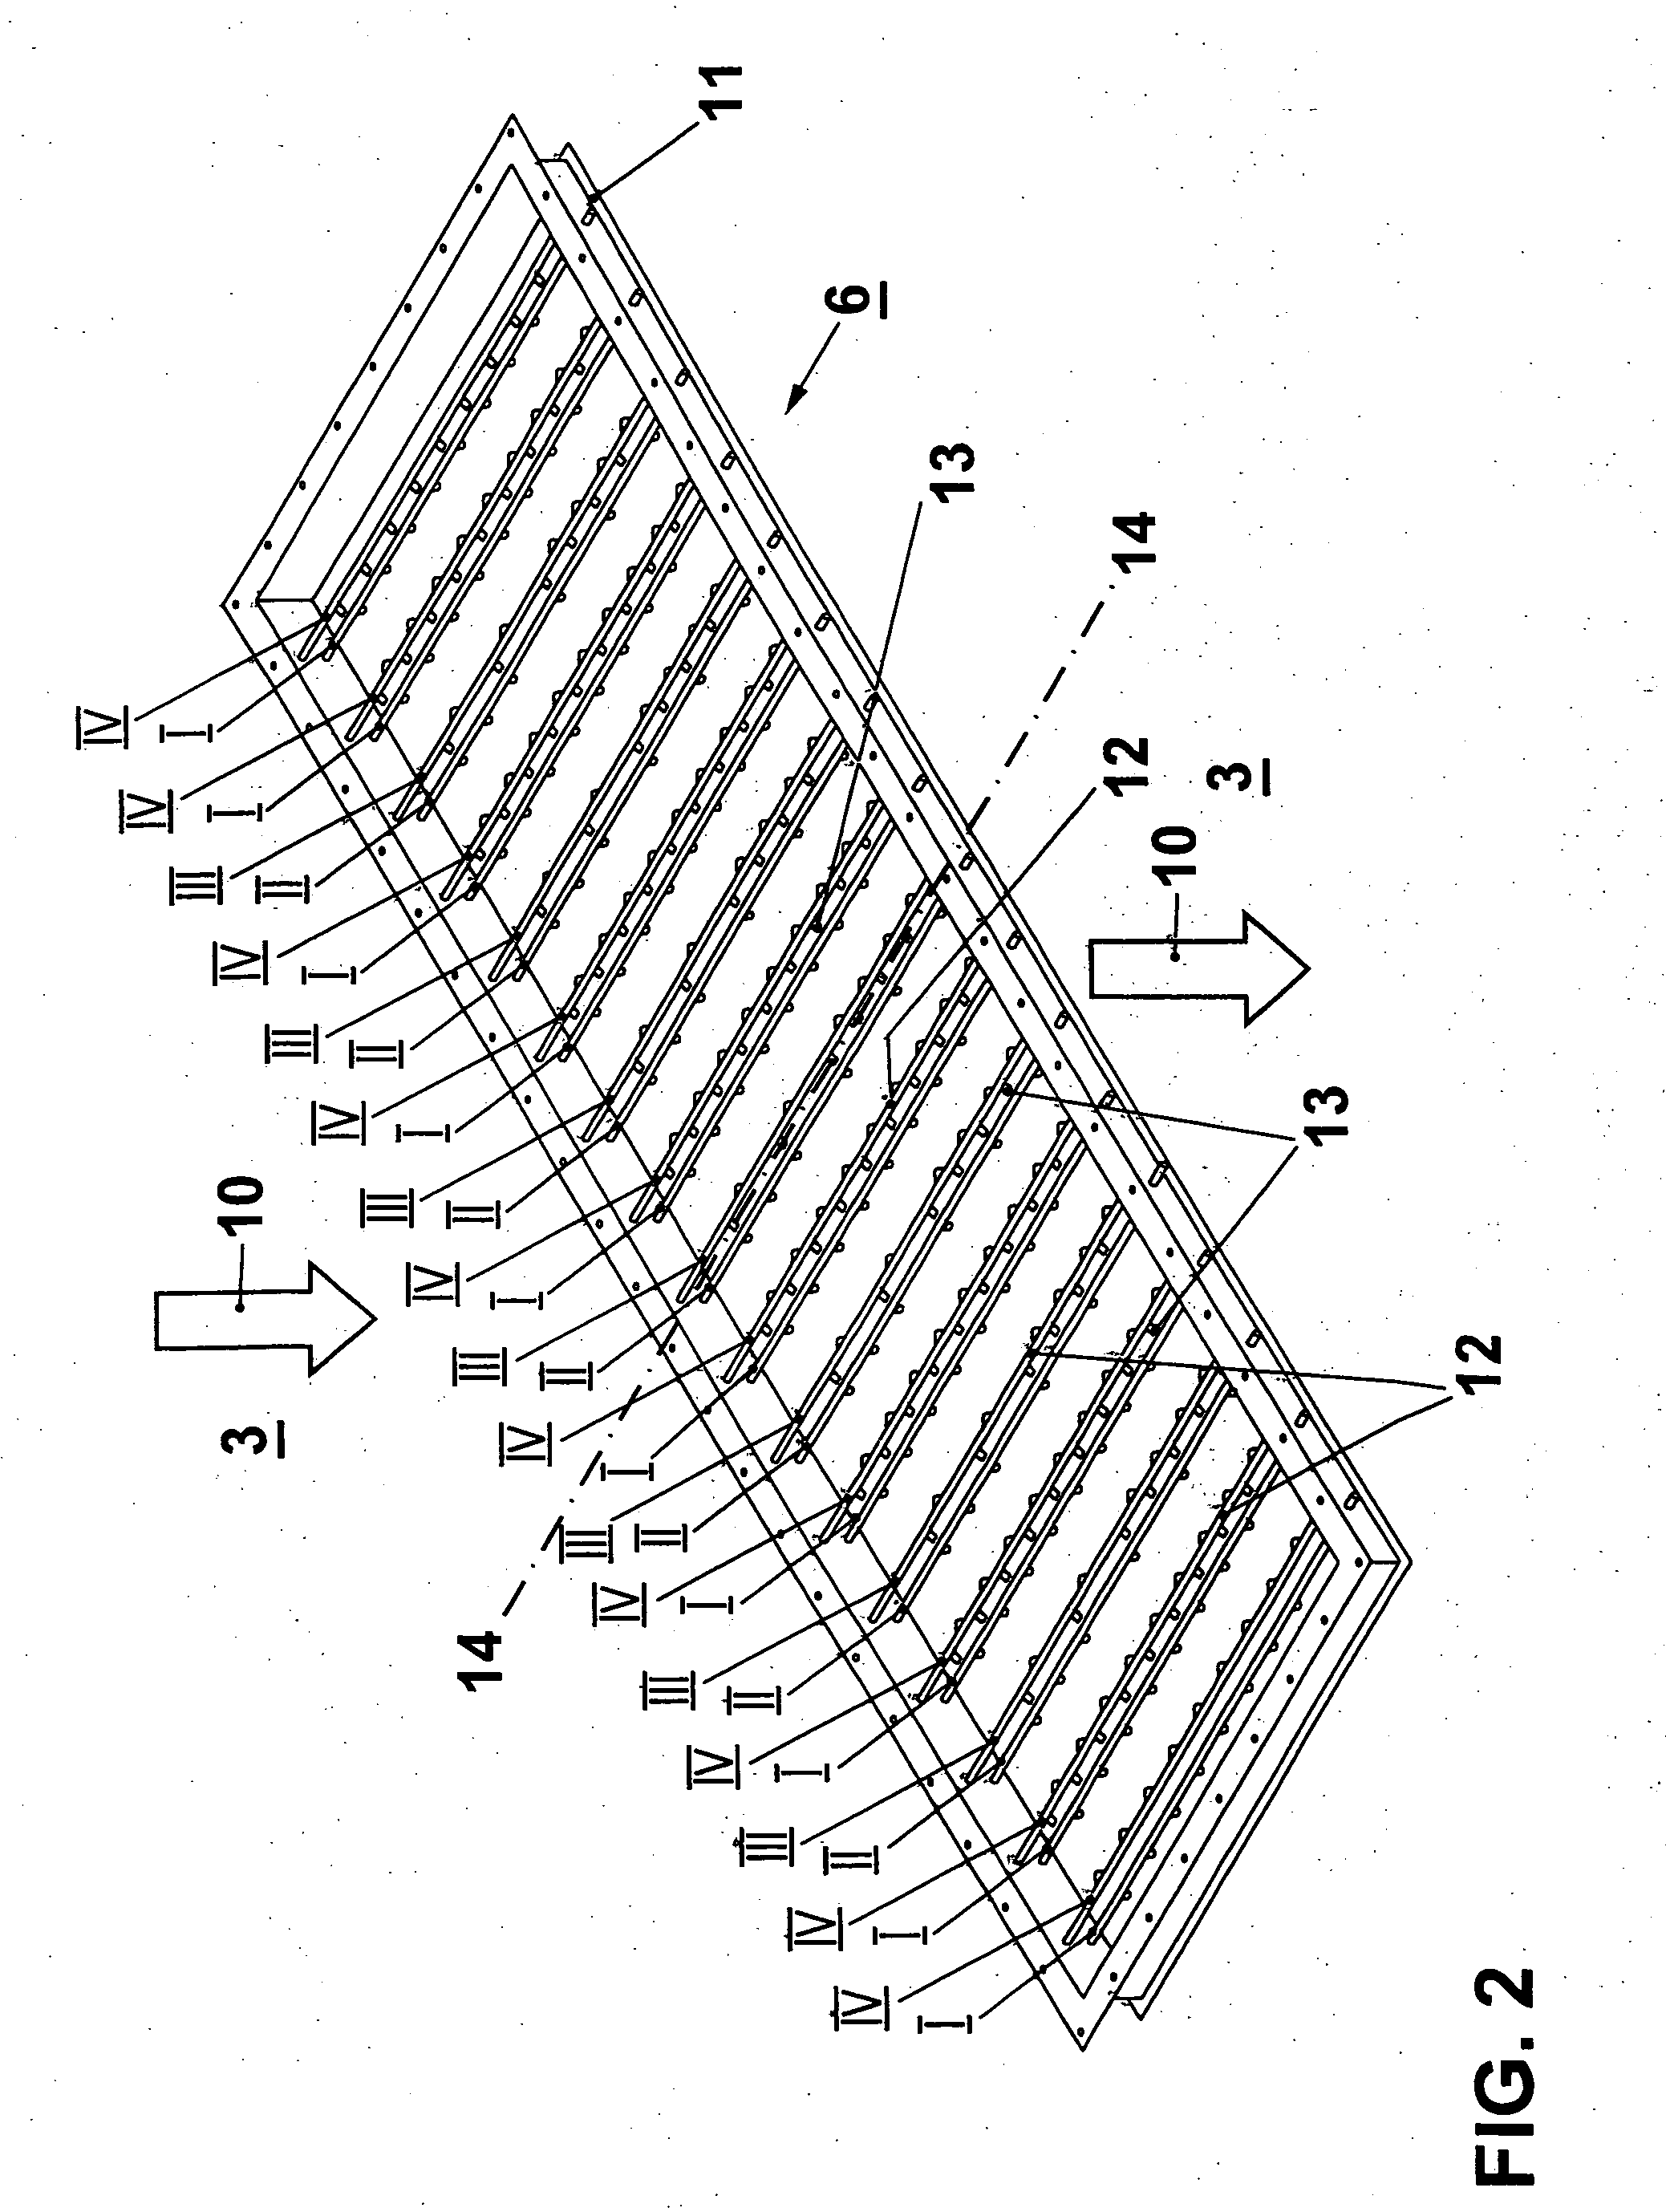 Method of controlling the injection of liquid into an inflow duct of a prime mover or driven machine